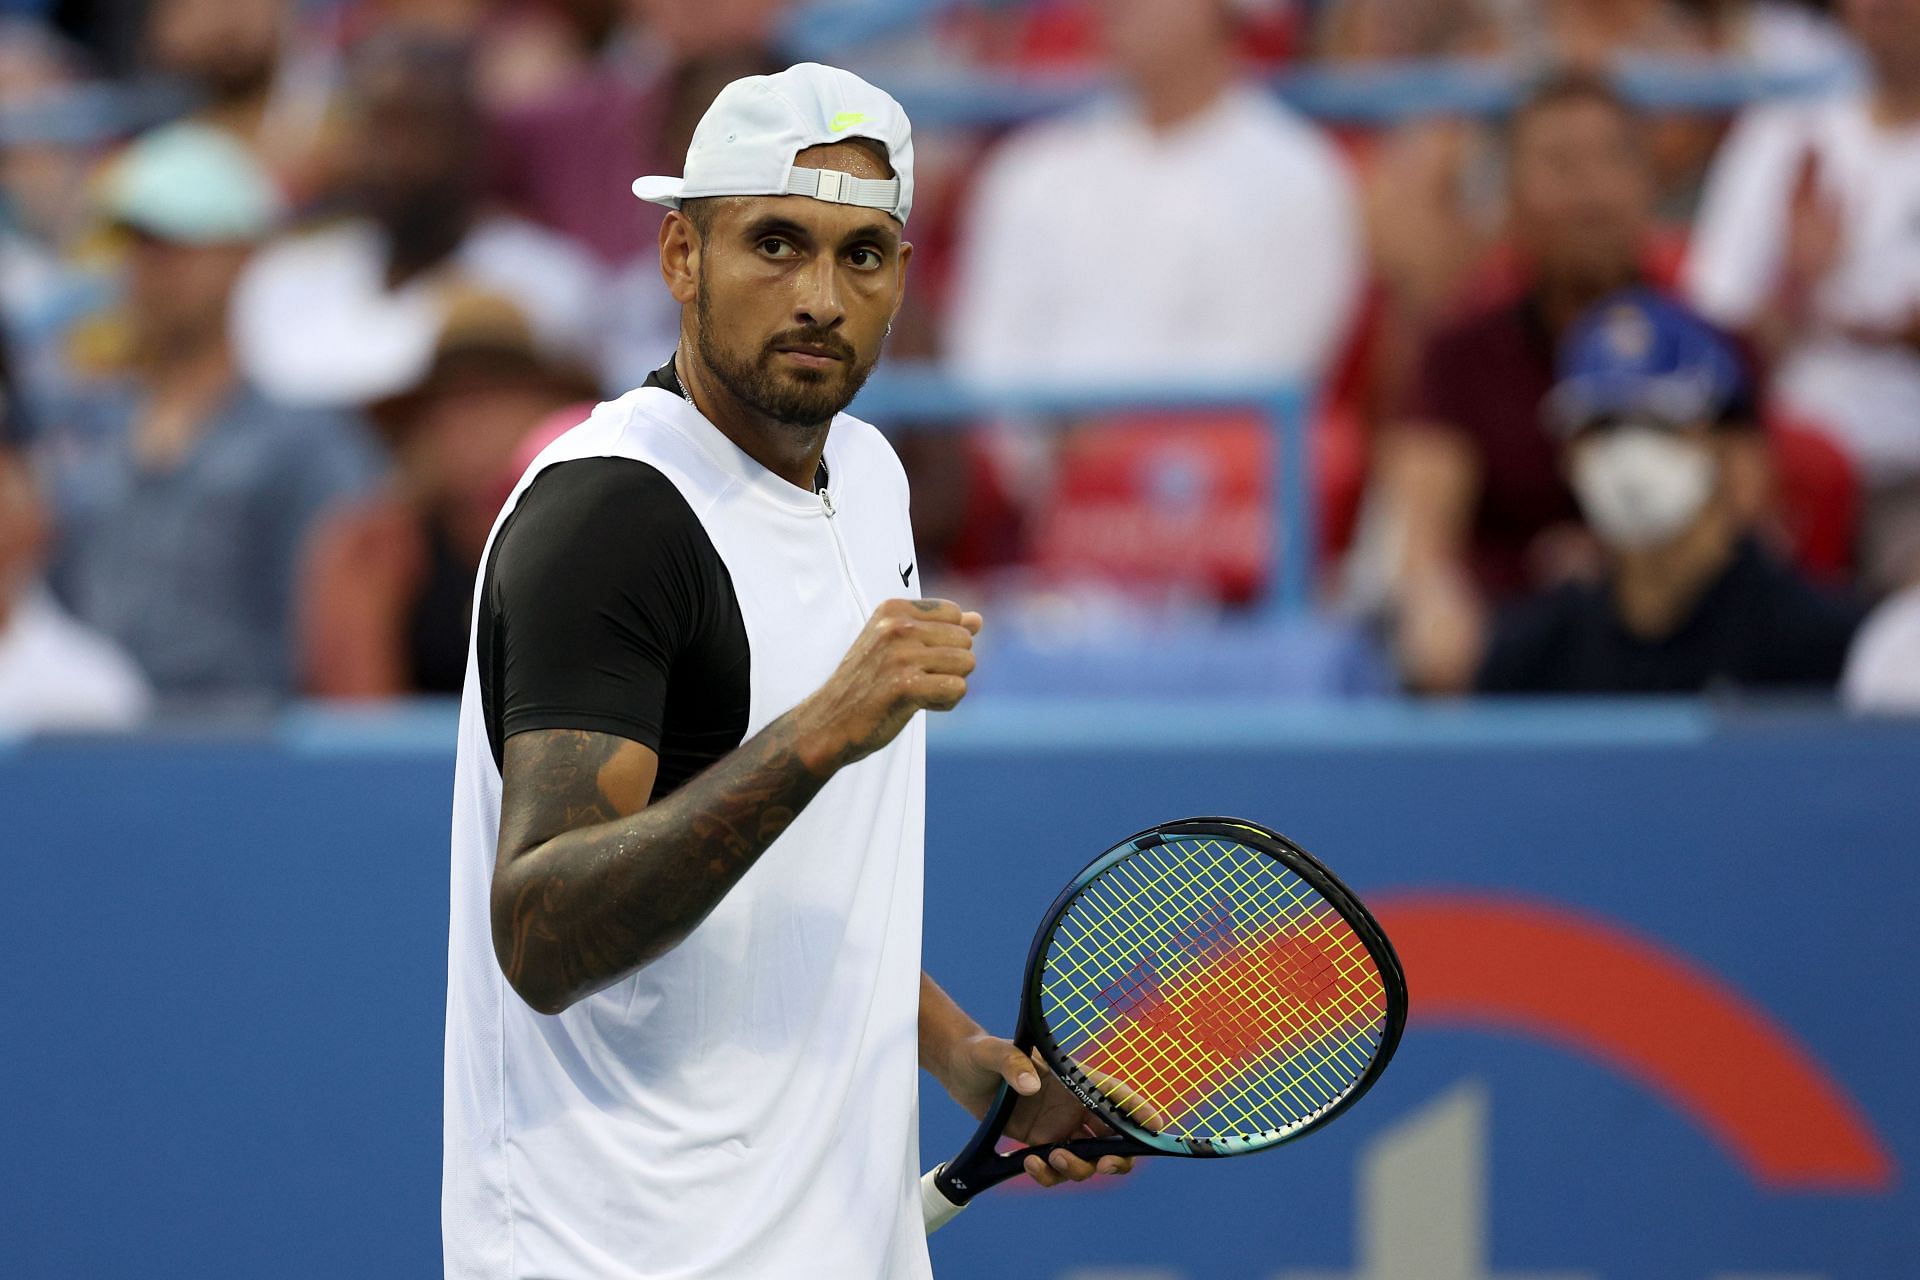 Nick Kyrgios will be in action today